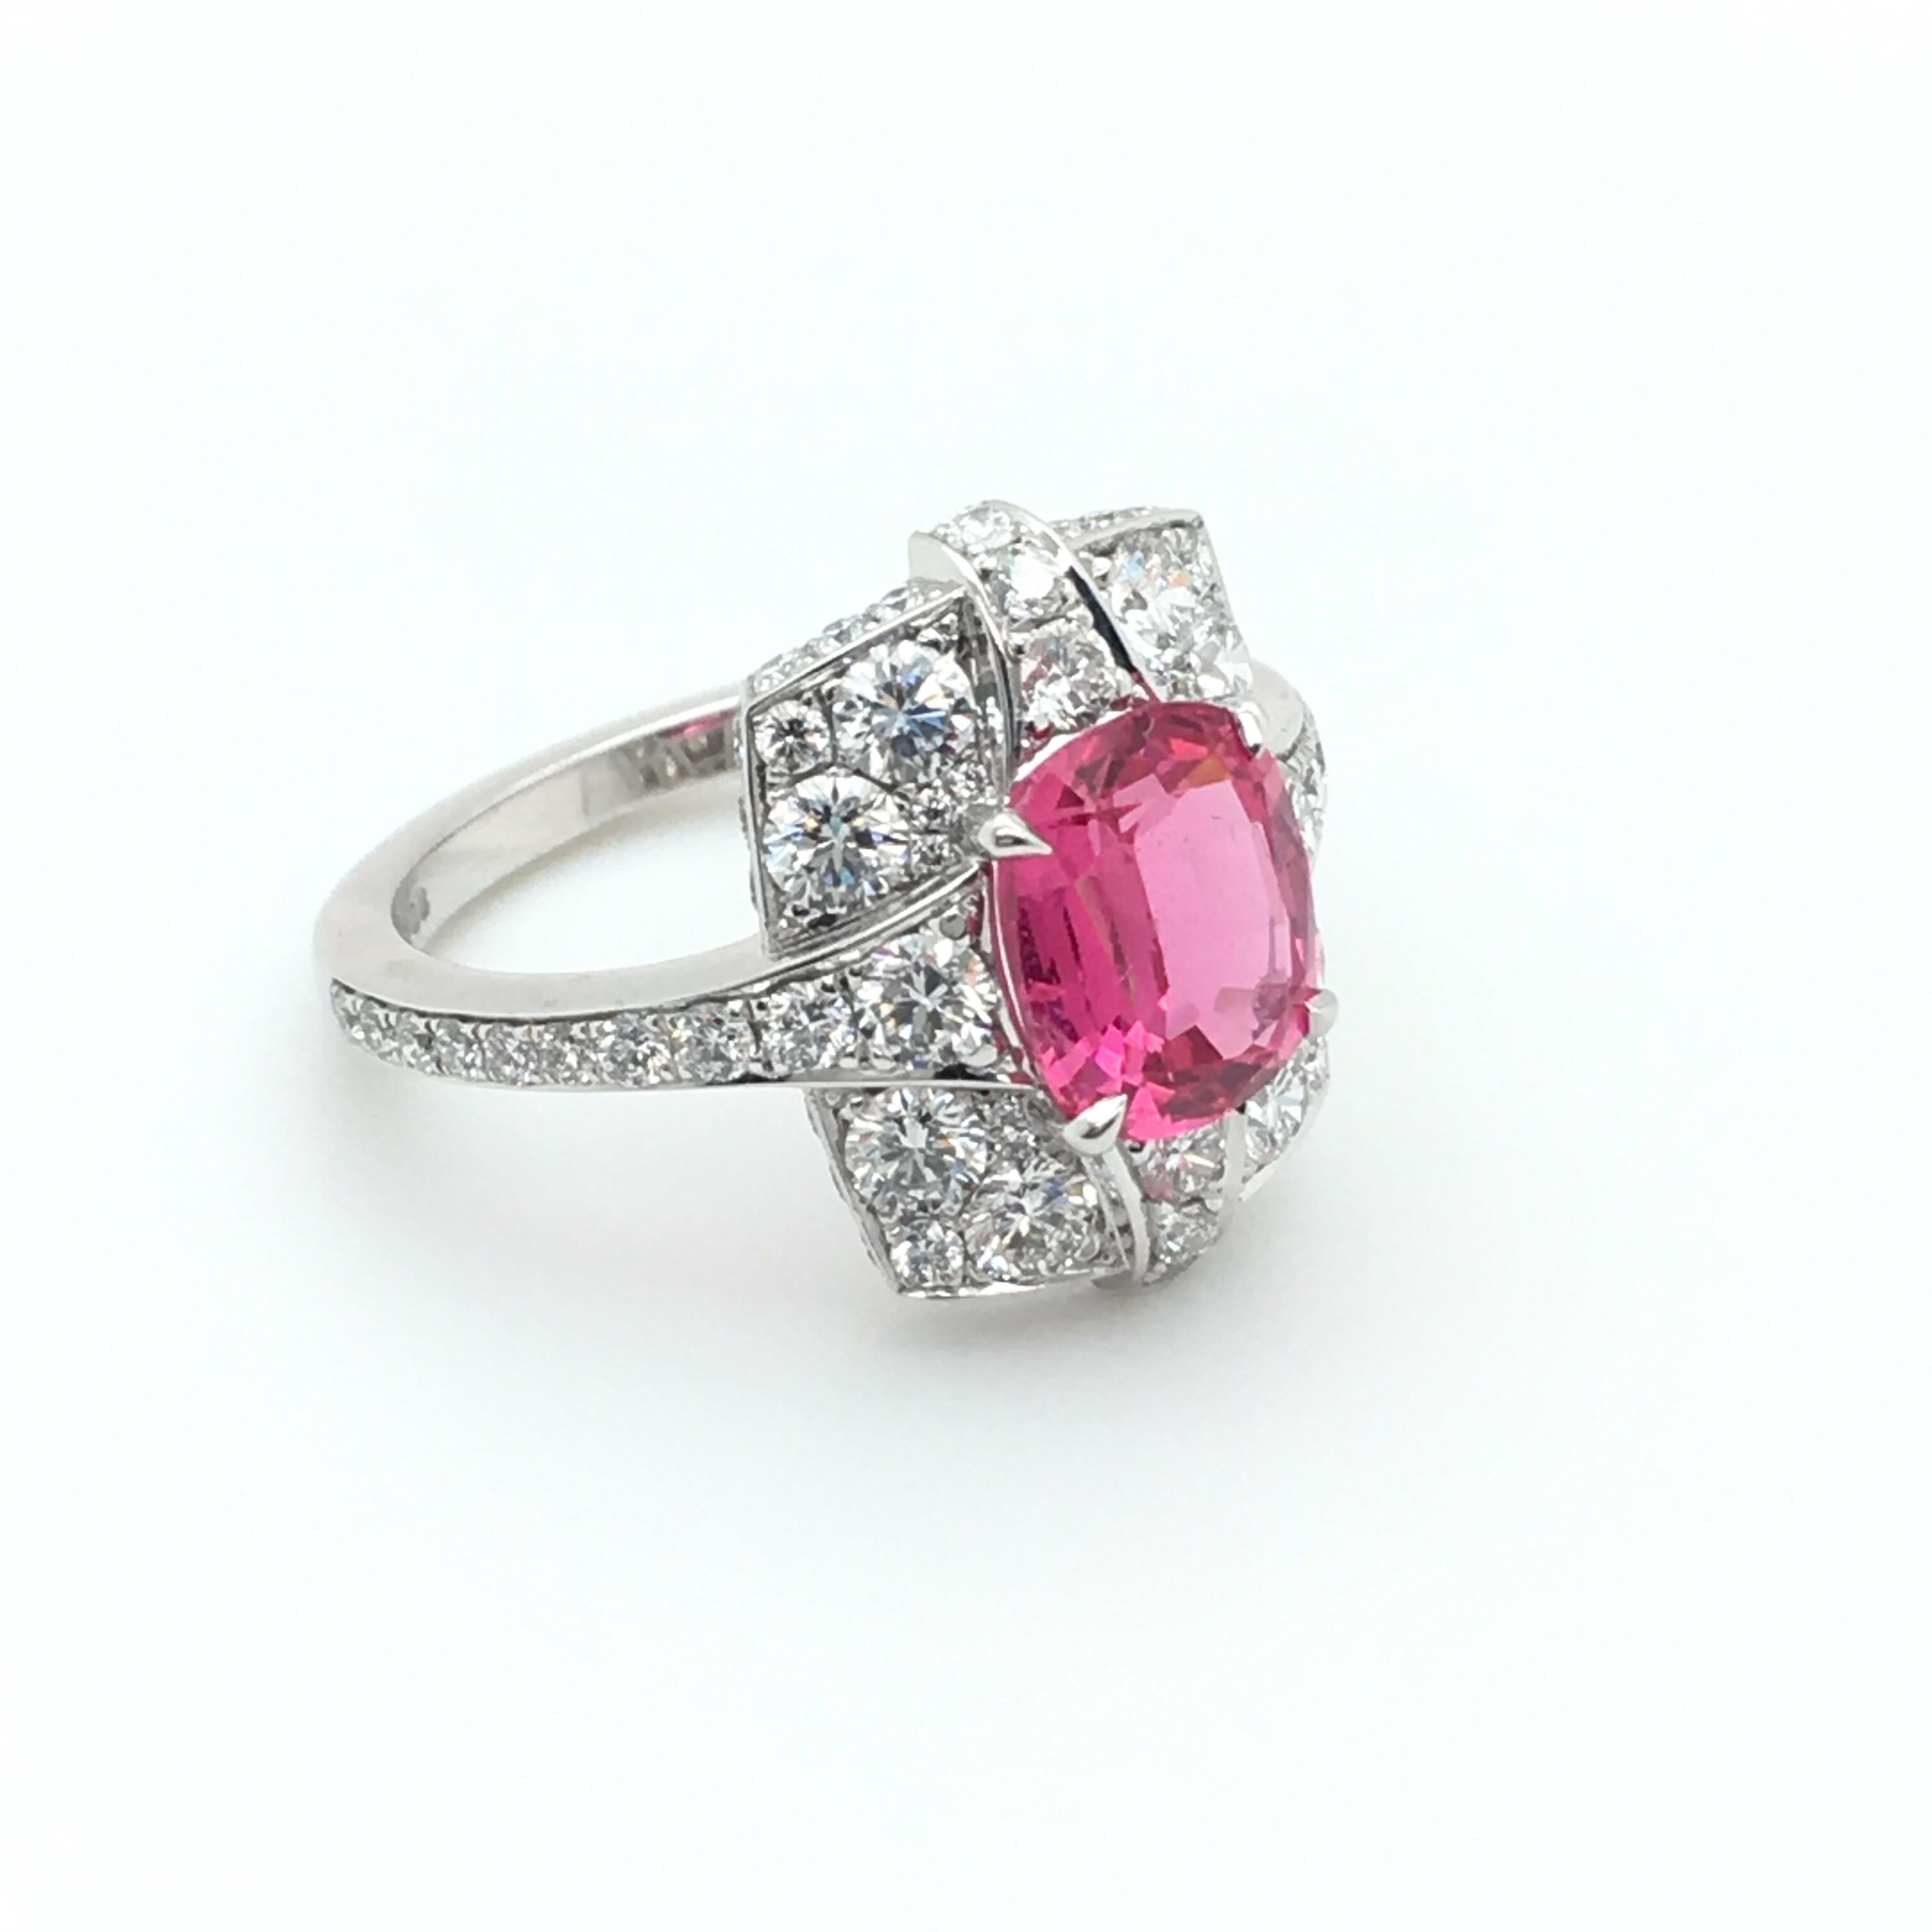 2.06 Carat Pink Spinel Cocktail Ring With Diamonds Set In White Gold In New Condition In London, GB